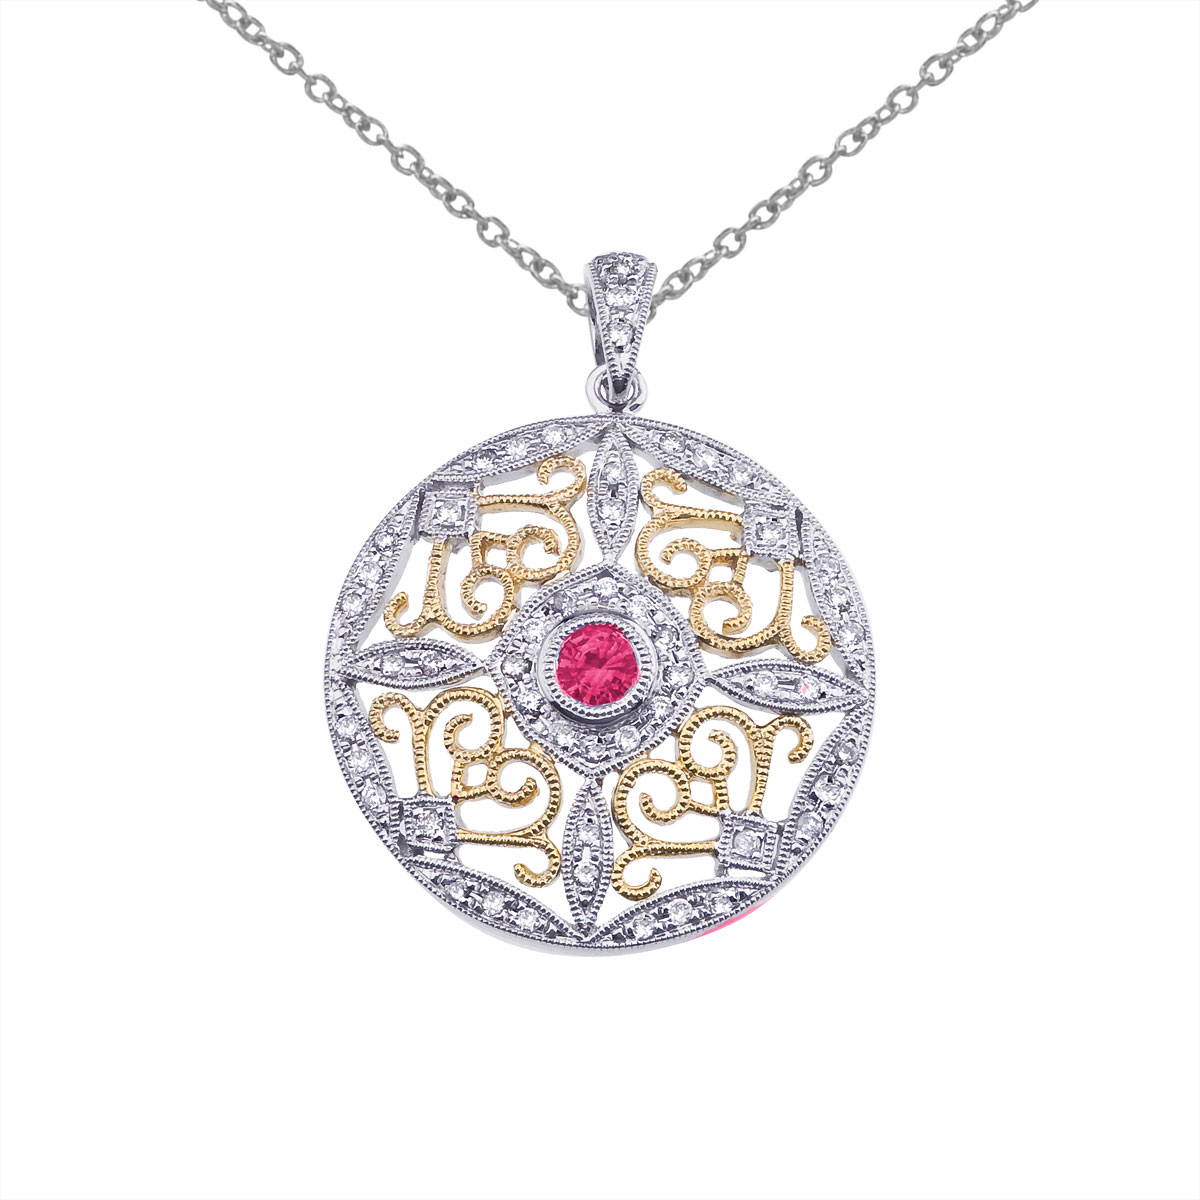 This pendant features a beautiful and intricate 14k two tone gold filigree design with a 4 mm rub...